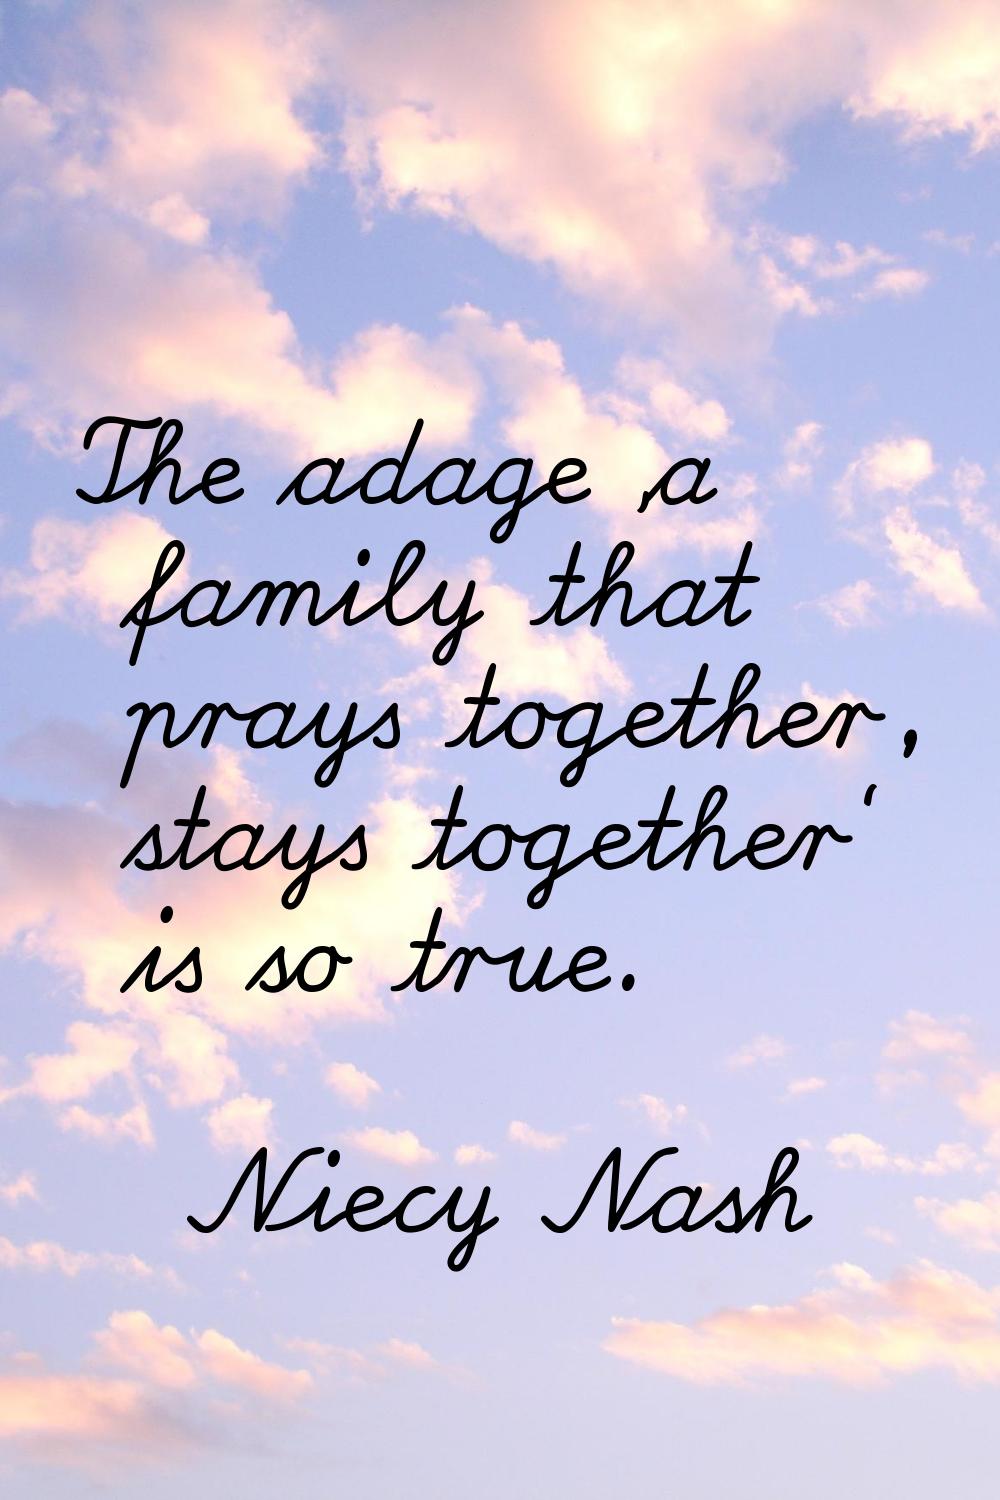 The adage 'a family that prays together, stays together' is so true.